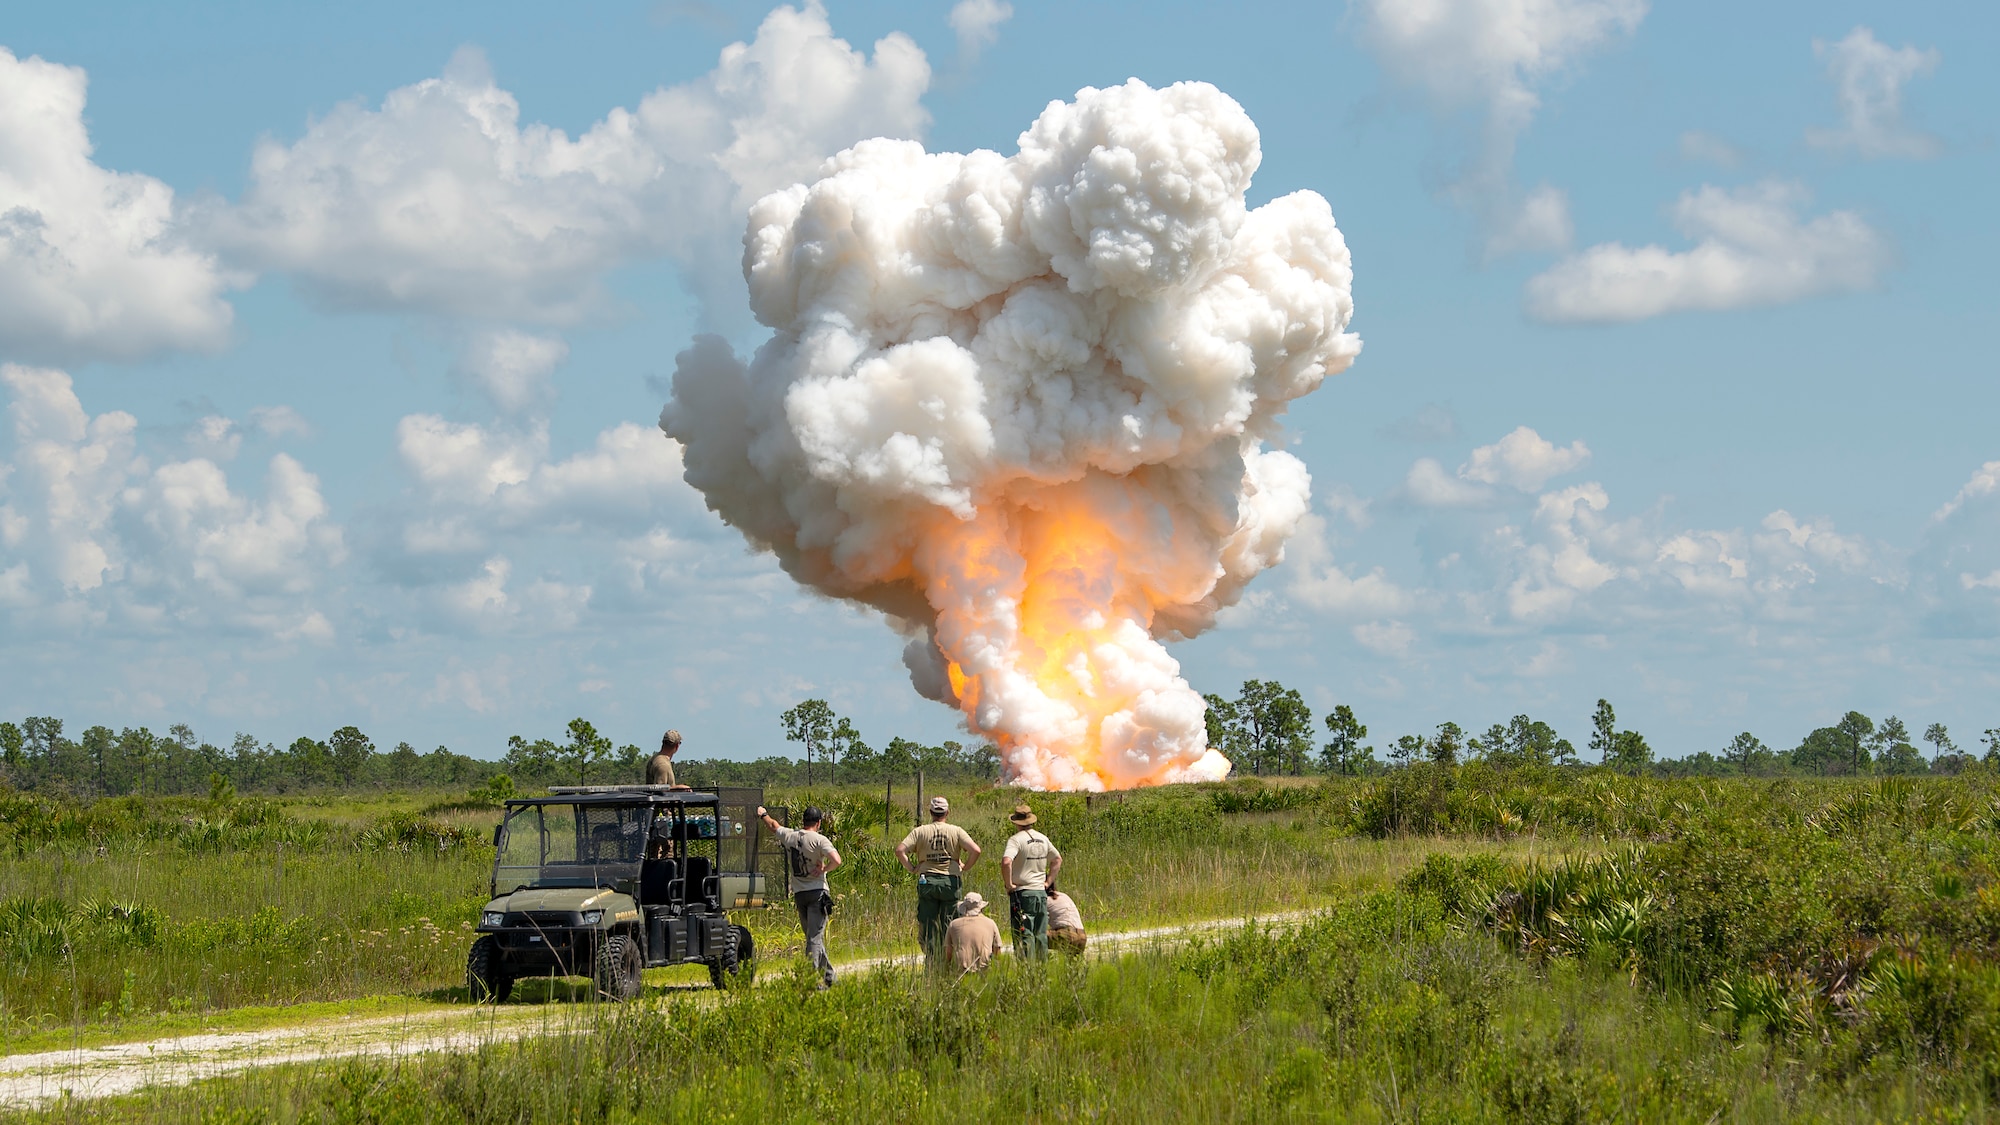 Members of the 6th Civil Engineer Explosive Ordnance Disposal Flight, the Bureau of Alcohol, Tobacco, Firearms and Explosives, and other local and state authorities, oversee a controlled detonation at the Avon Park Air Force Range, Fla., Sept. 9, 2019. The ATF seized over 7,000 pounds of explosives from a prior convicted felon in the largest explosives seizure in Florida history.